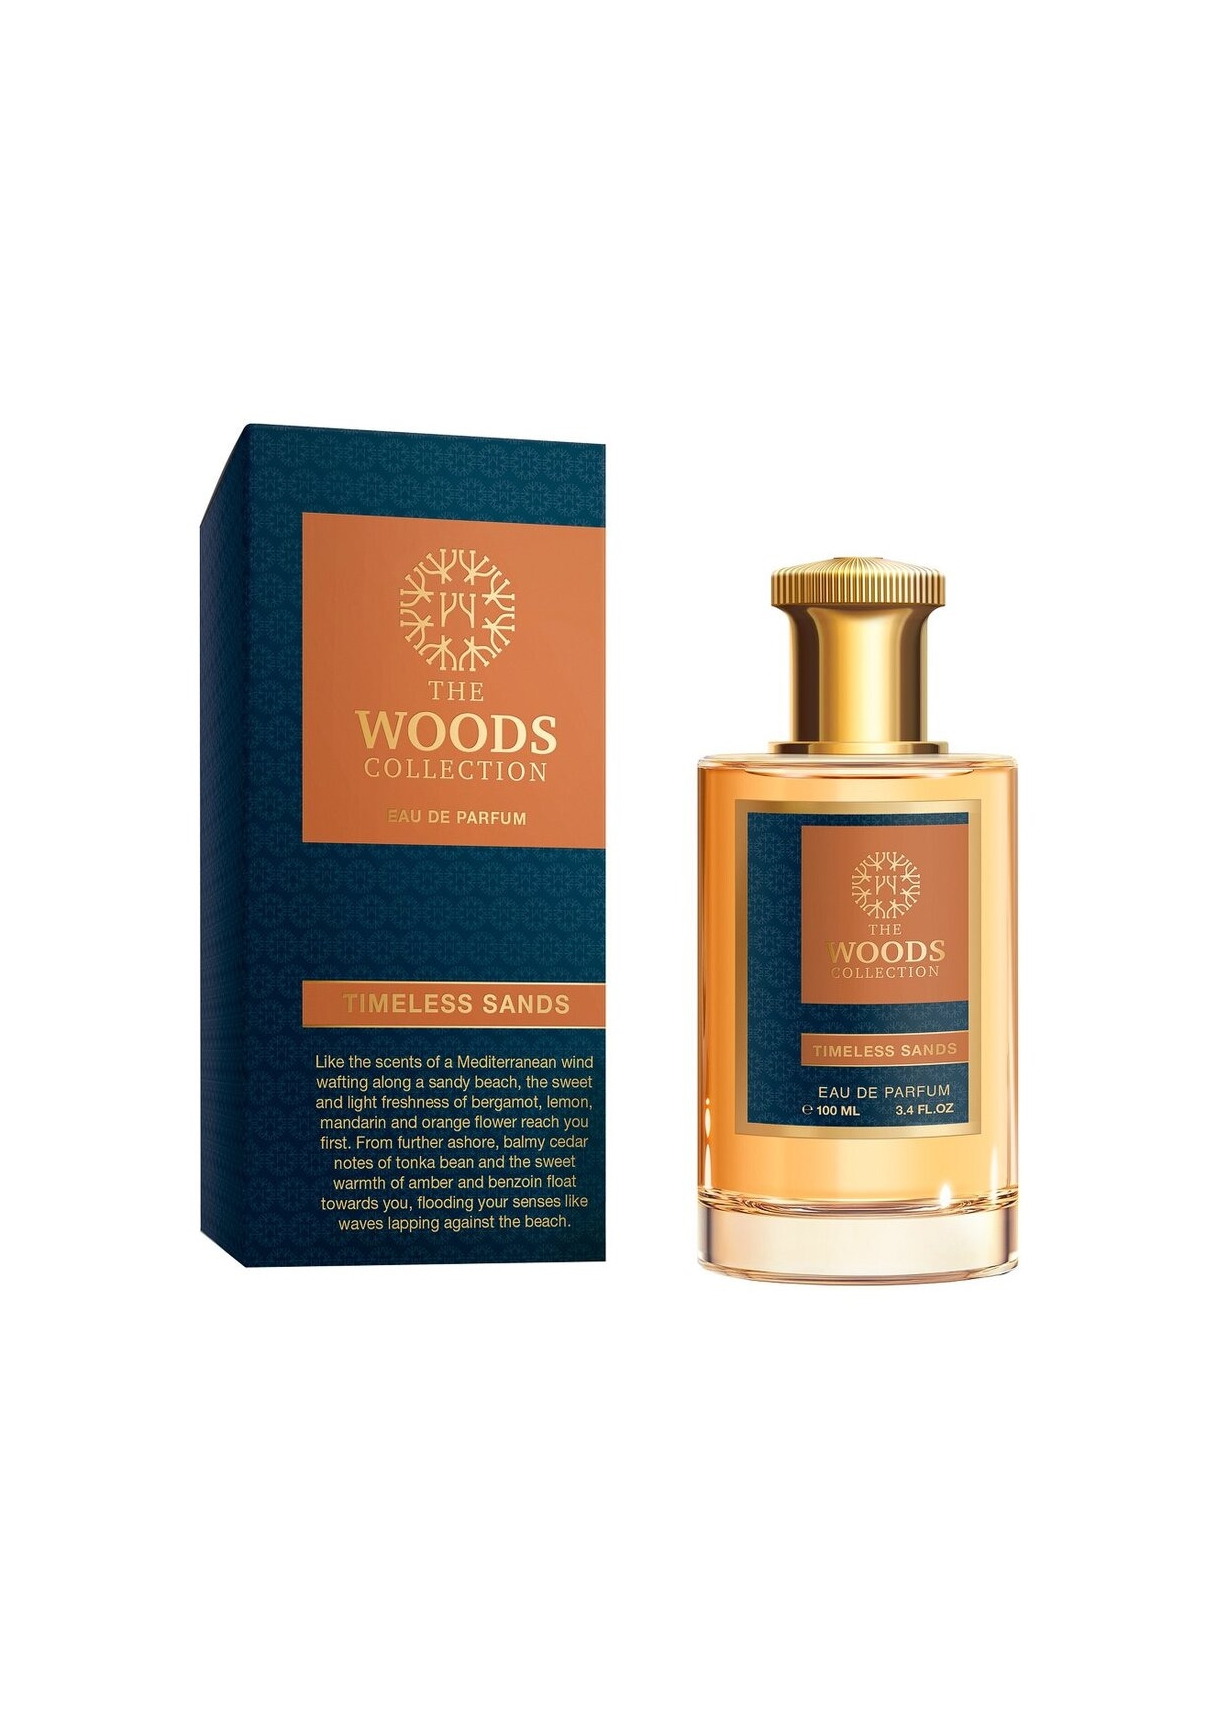 The woods collection dark. Green walk Парфюм. The Woods collection Dark Forest духи. Парфюмерная вода the Woods collection Dancing leaves. Woods Timeless Sands EDP 100 ml.